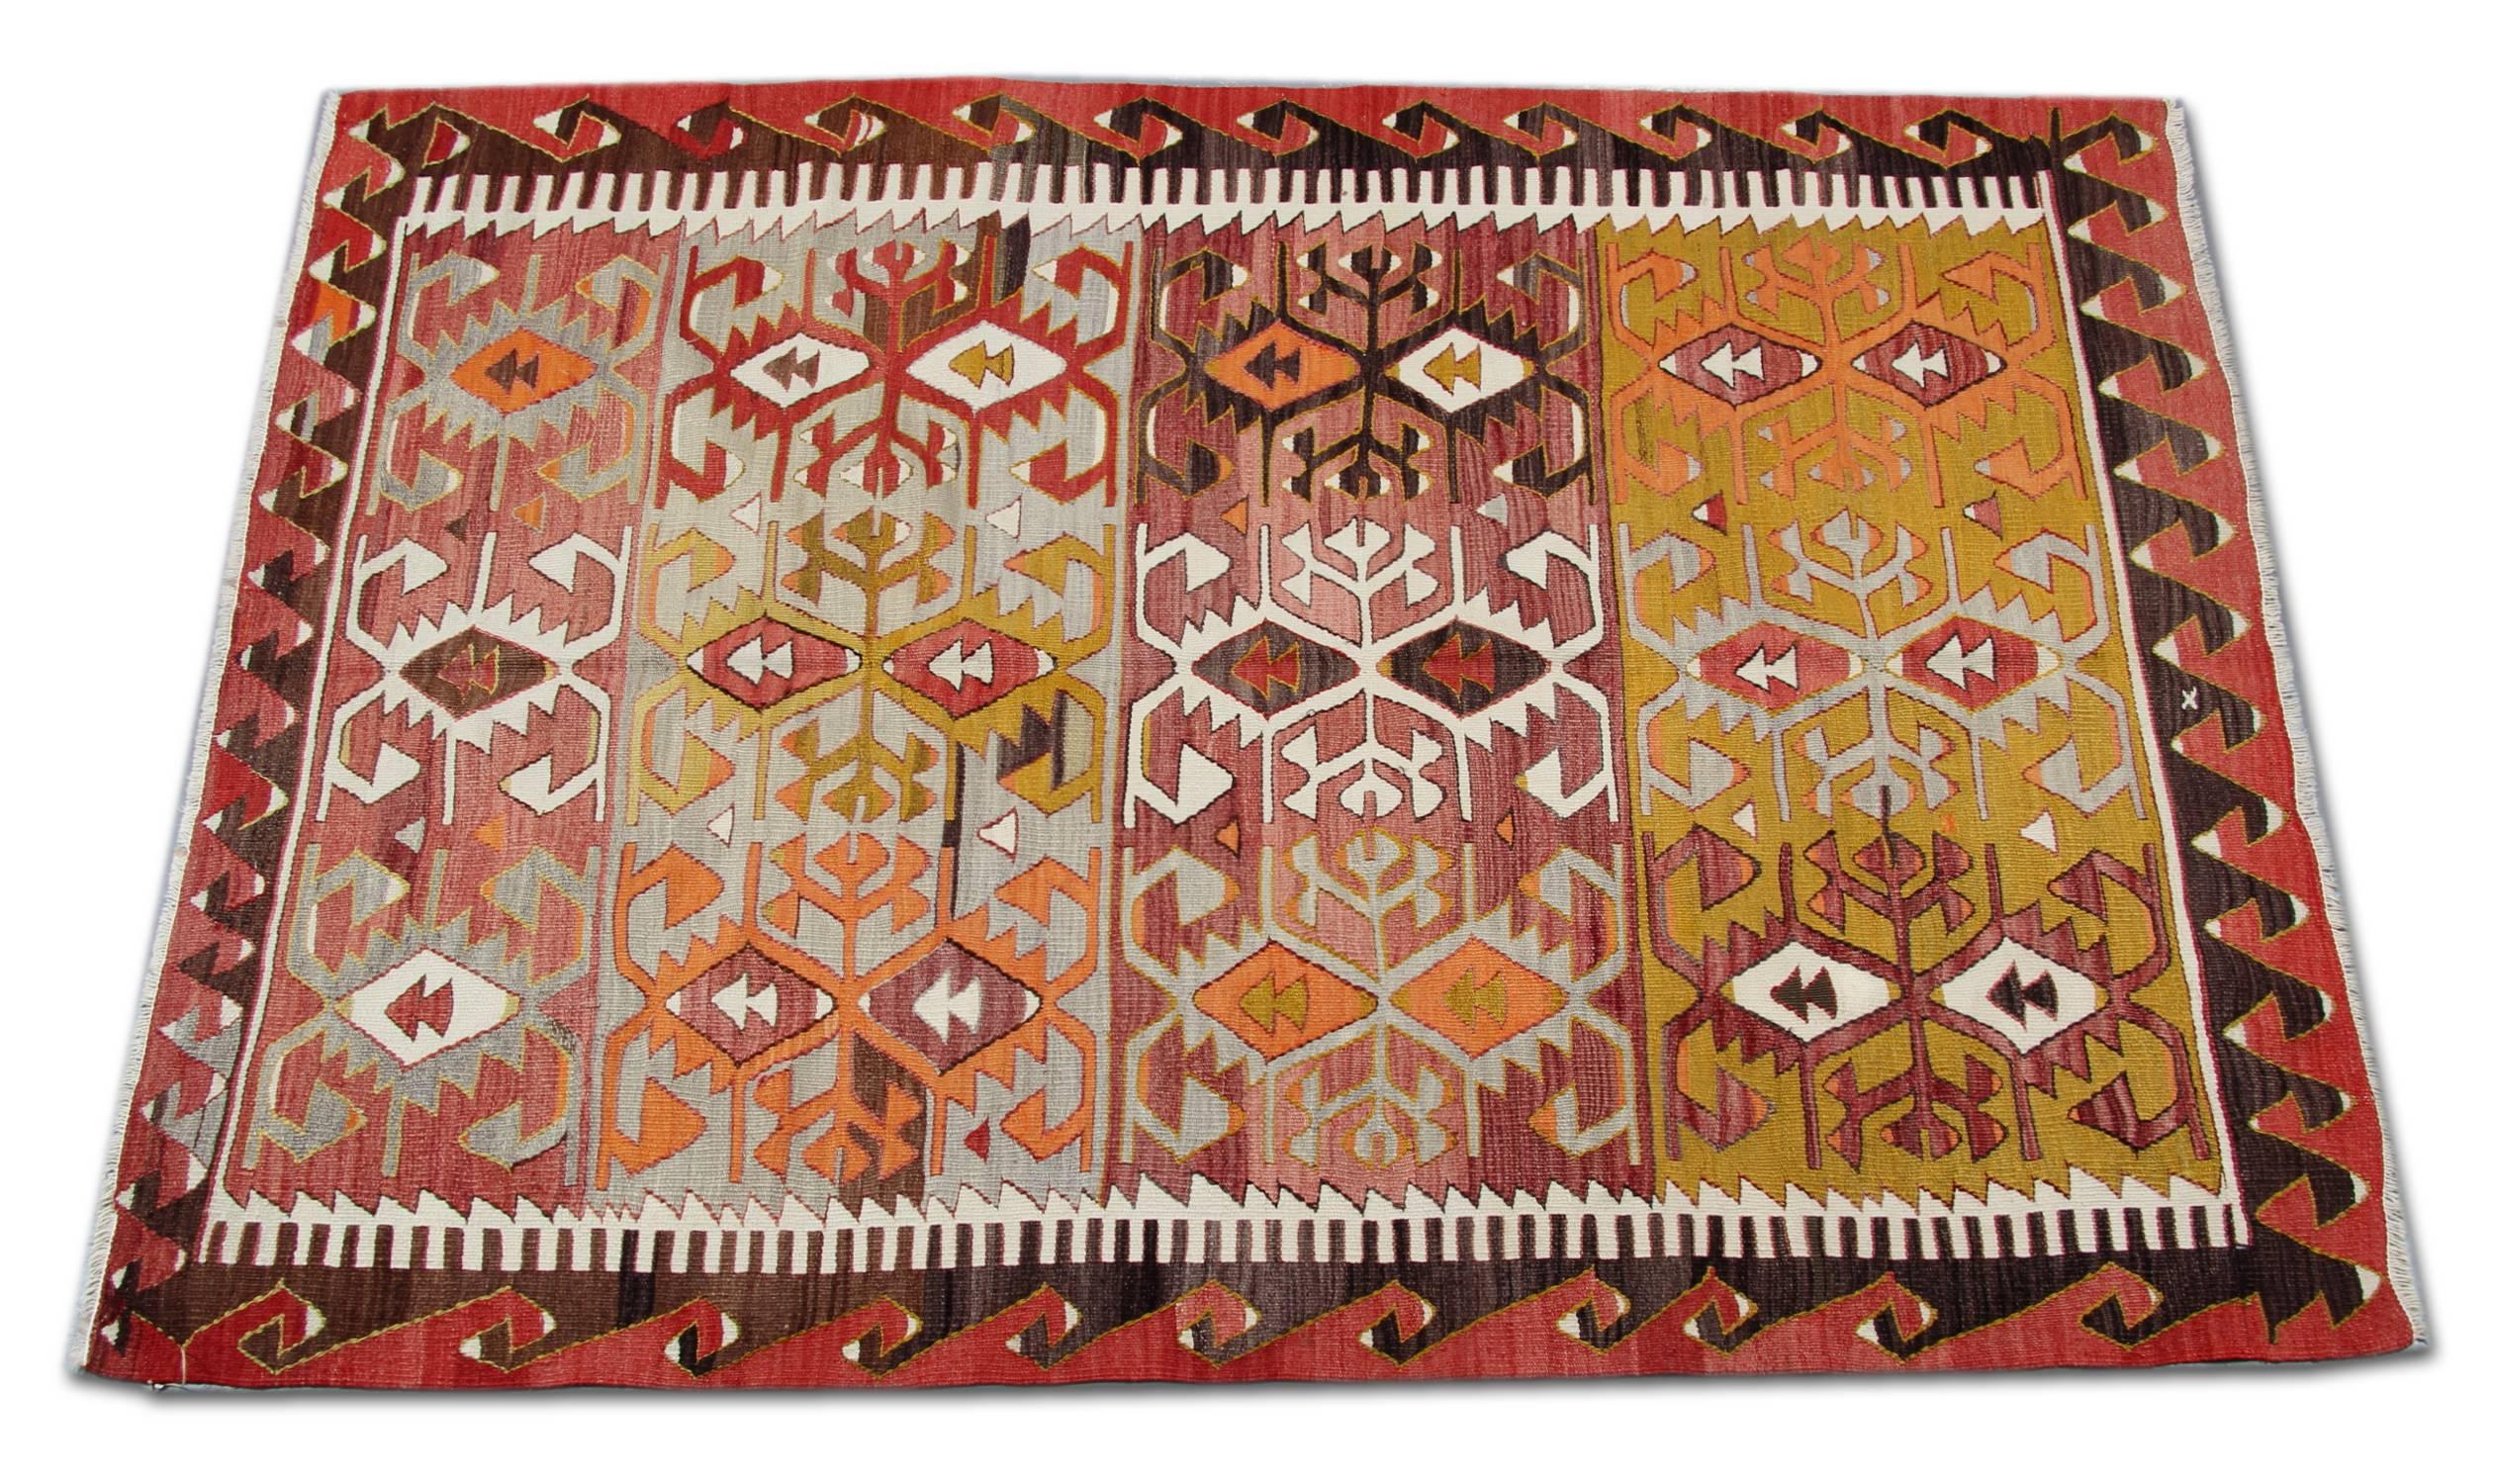 This Antique Rug is Turkish handmade carpet oriental rug has woven by very skilled weavers in Turkey, who used the highest quality wool and cotton. The flat-weave rug has light red, orange, grey-green, white, gold, yellow and dark brown colours. The